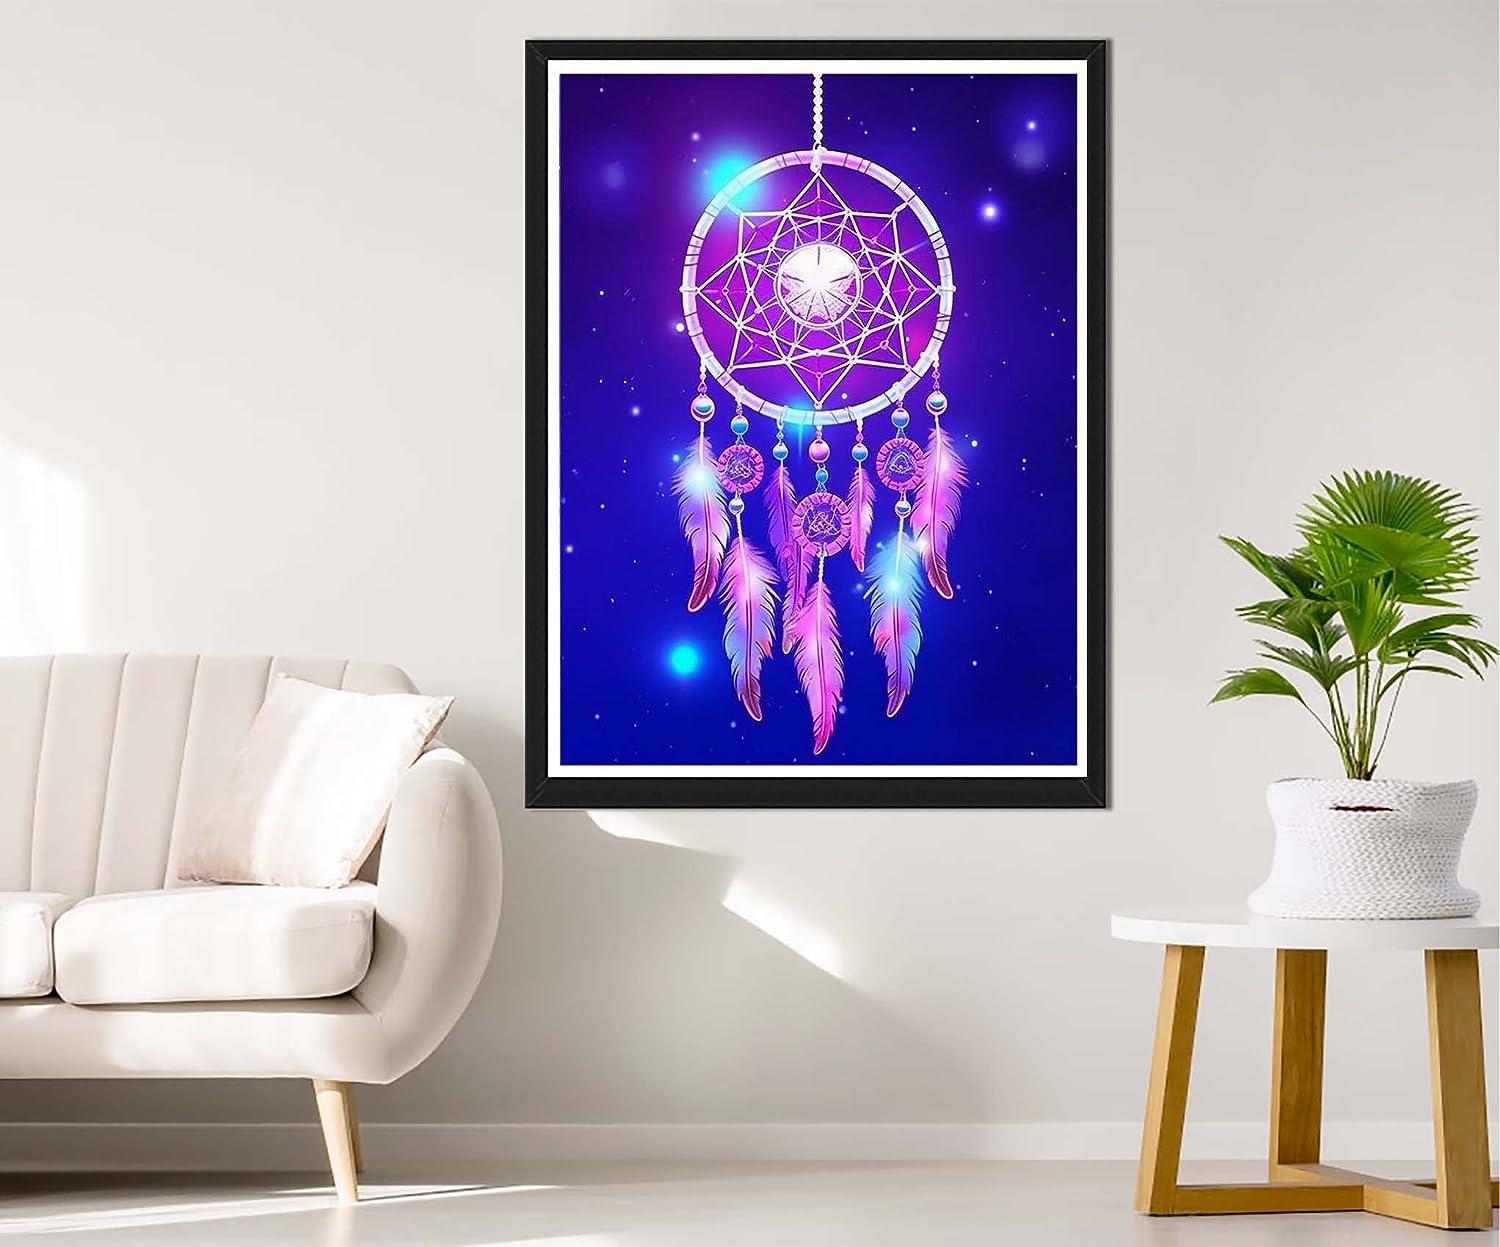 Stitch Diamond Painting, Diamond Art Stitch Round Diamond Painting DIY 5D  Full Drill Art Perfect for Relaxation and Home Wall Decor(Cute